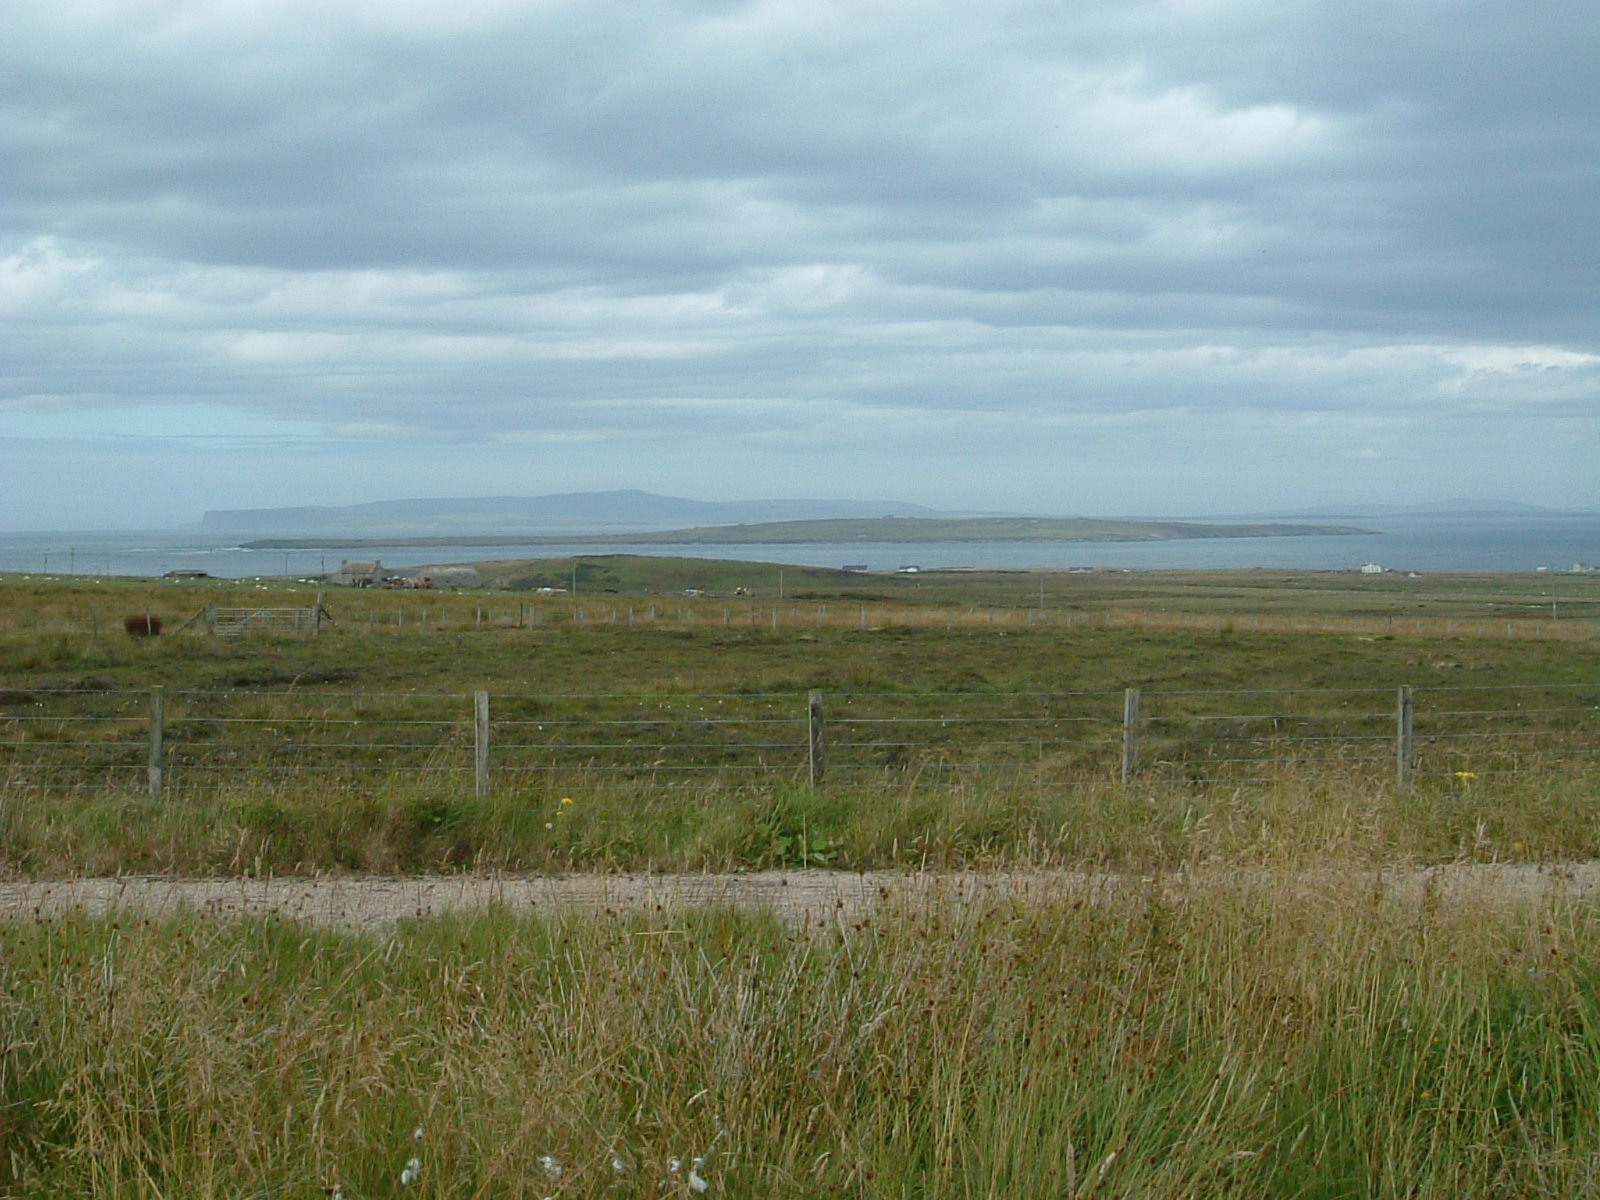 My first view of the Orkney Islands